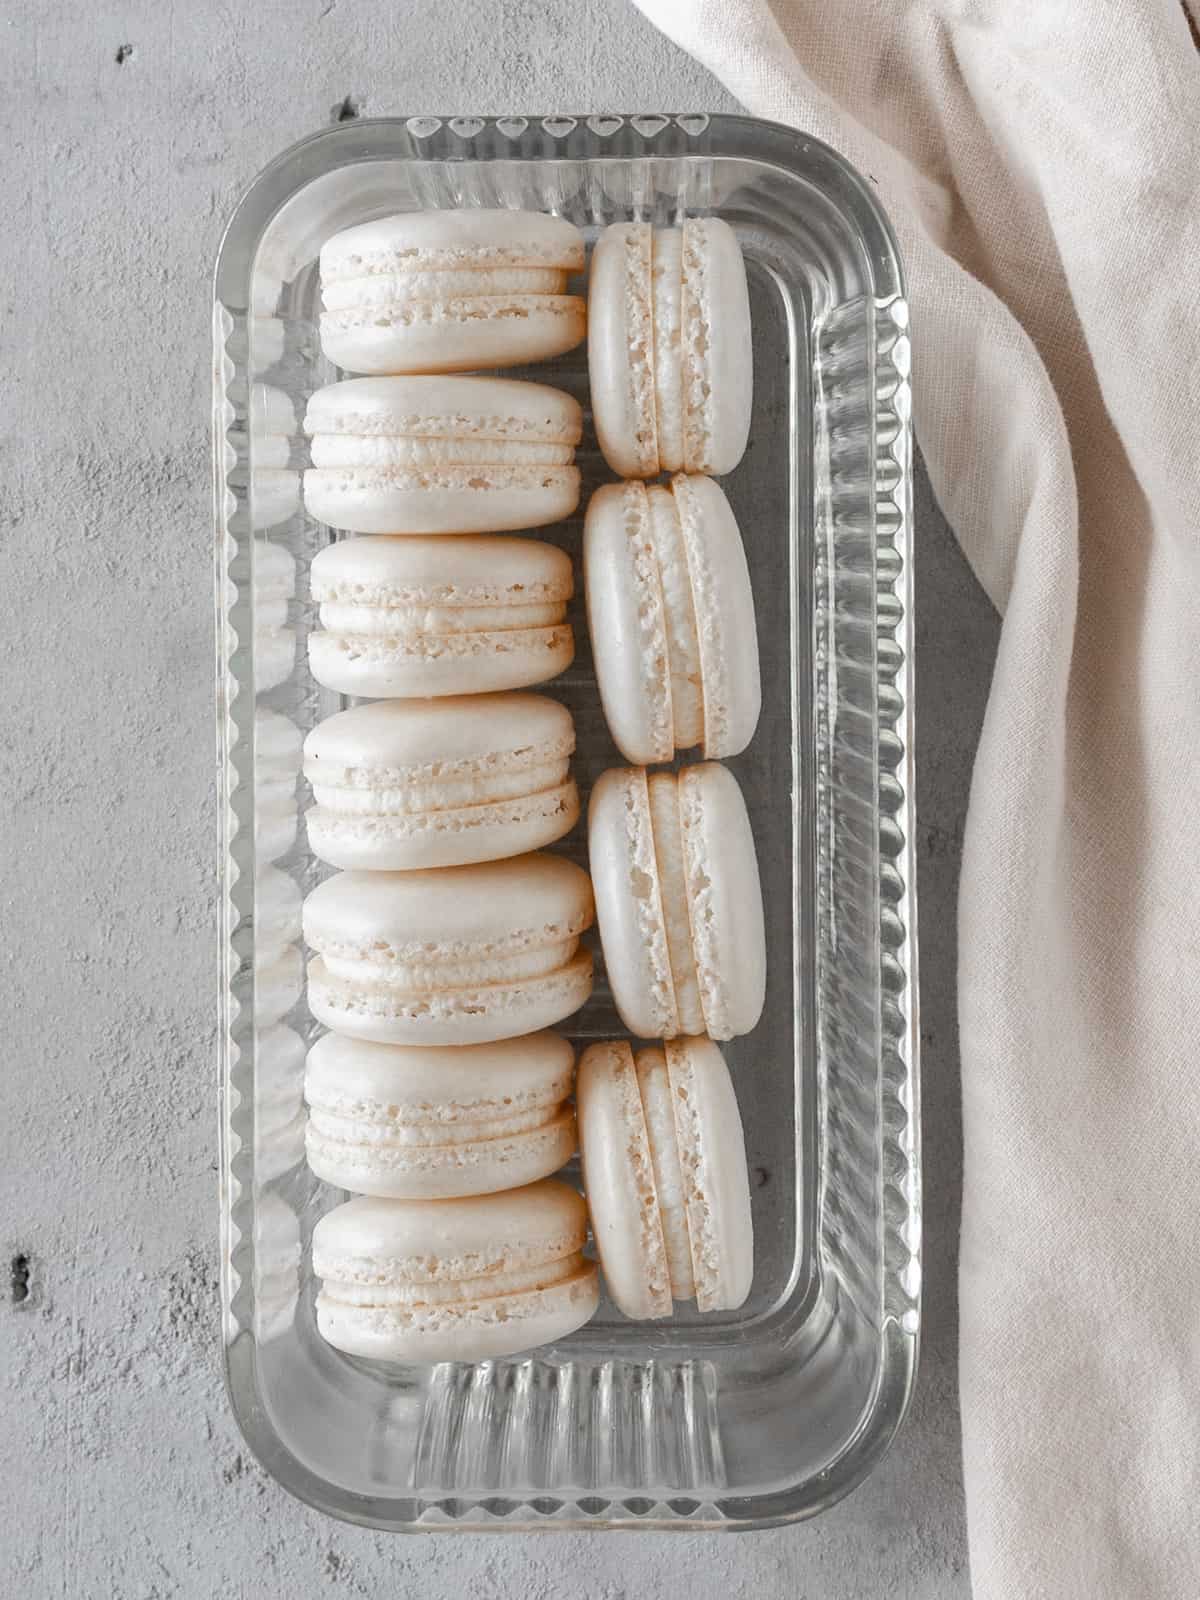 two rows of french macarons stacked on their sides in a glass dish